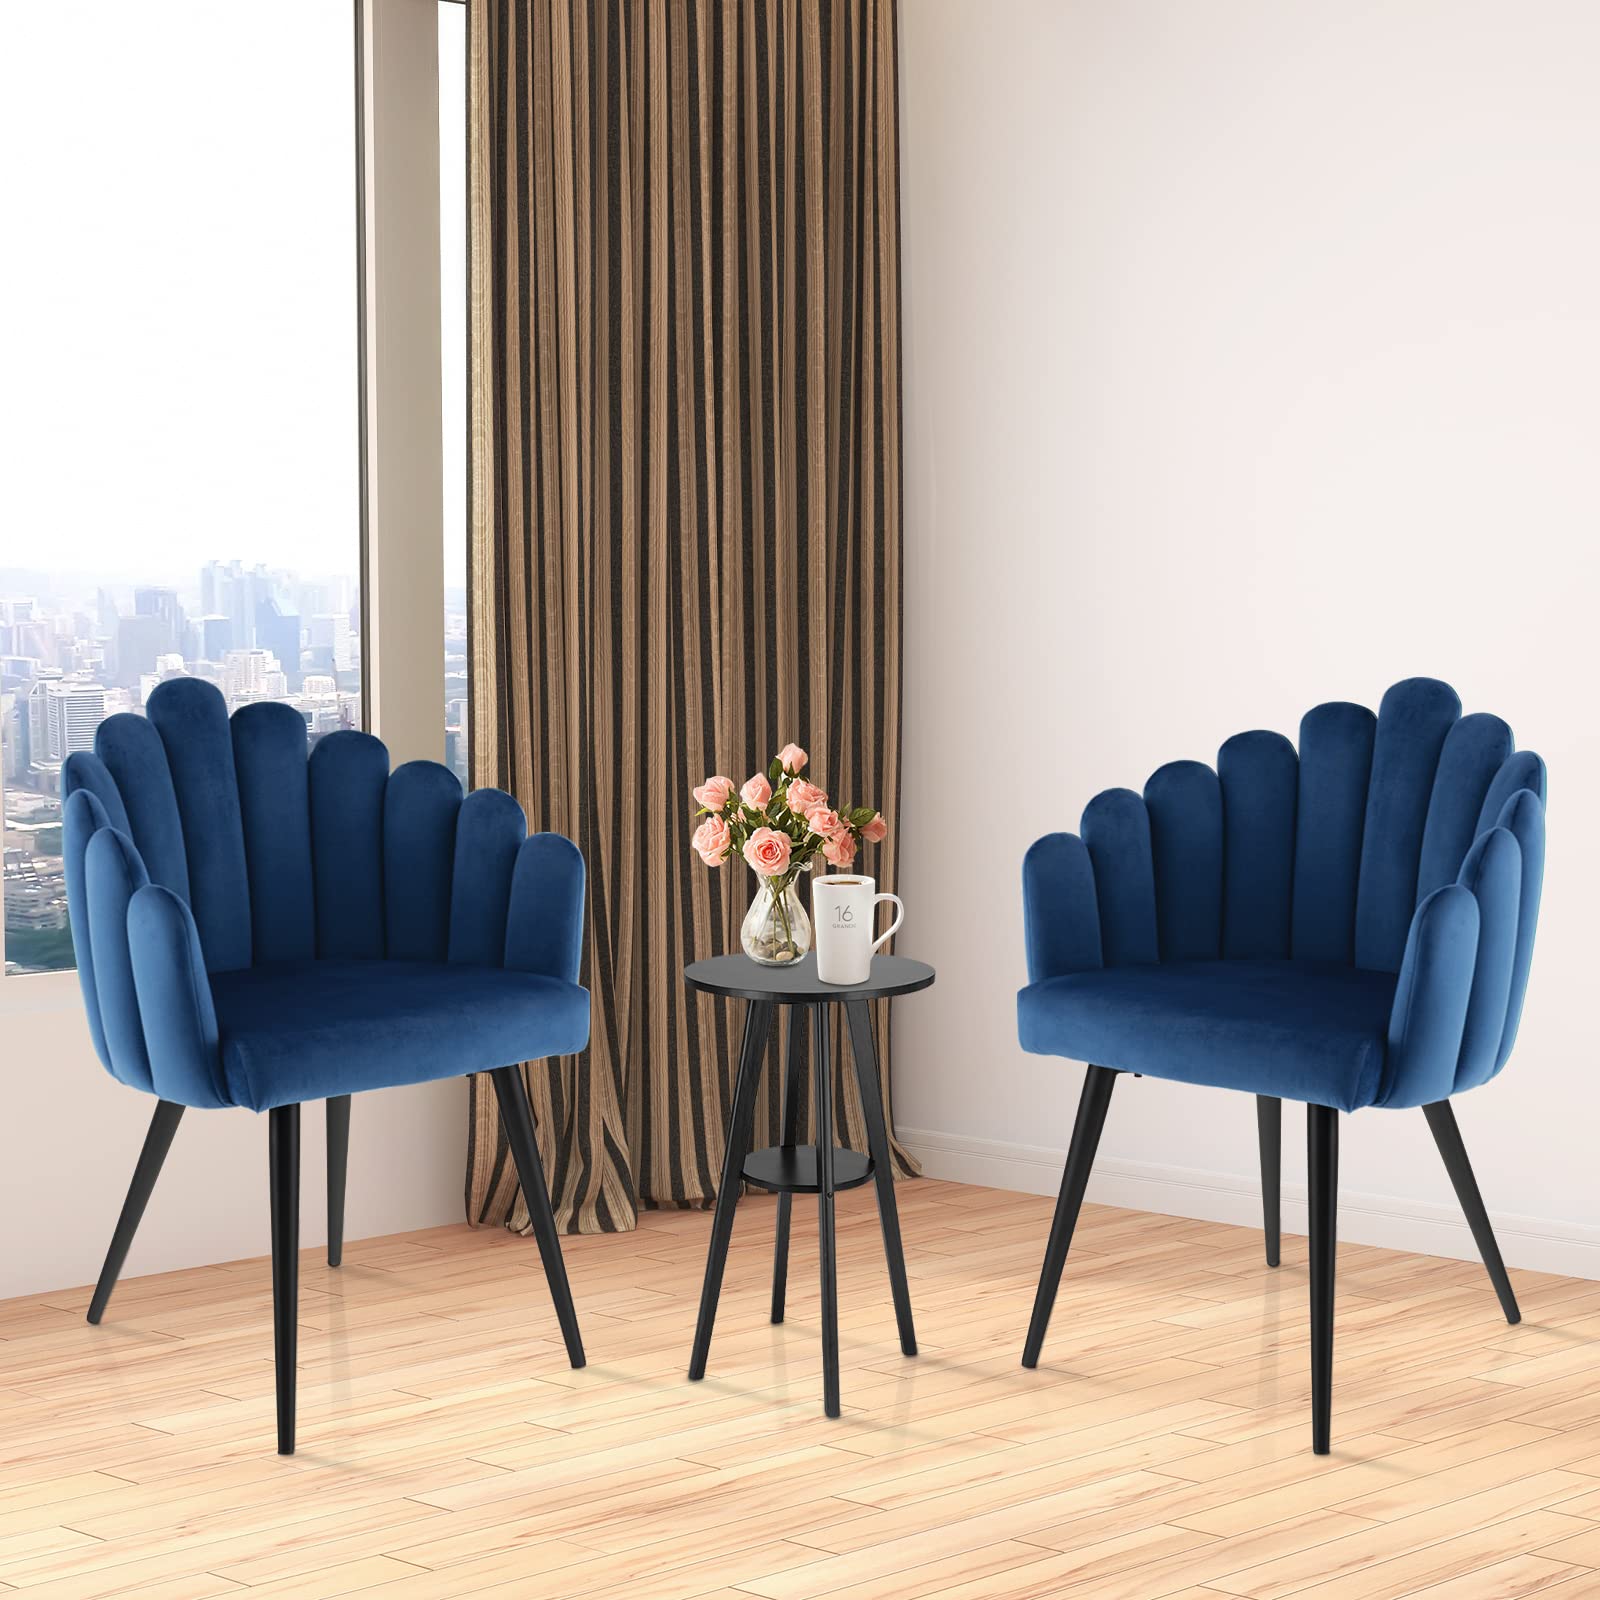 Giantex Modern Mid-Century Dining Chairs Set of 2 - Cute Velvet Vanity Chair with 16” High Back, 330lb Capacity